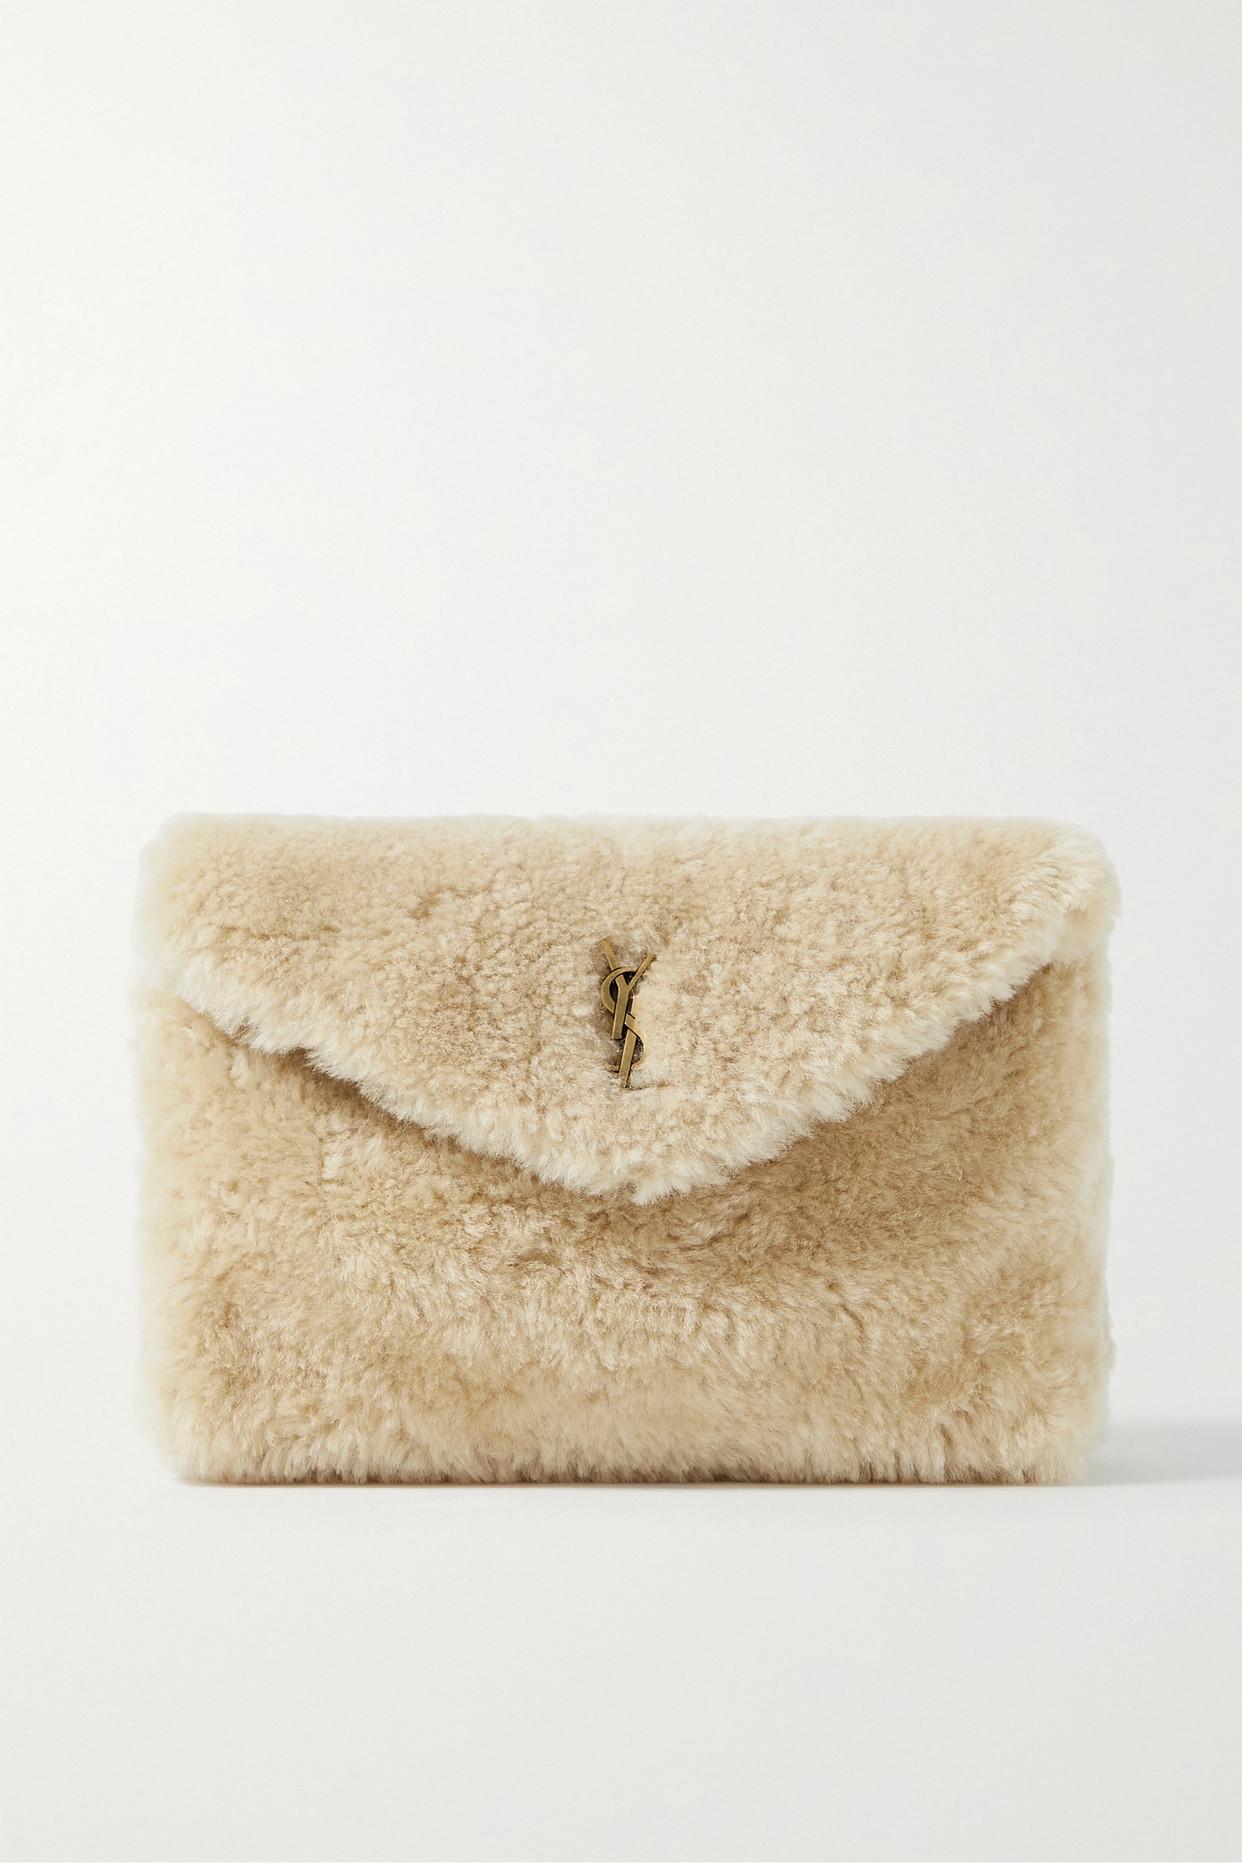 Saint Laurent Puffer Small Shearling Clutch in Natural | Lyst